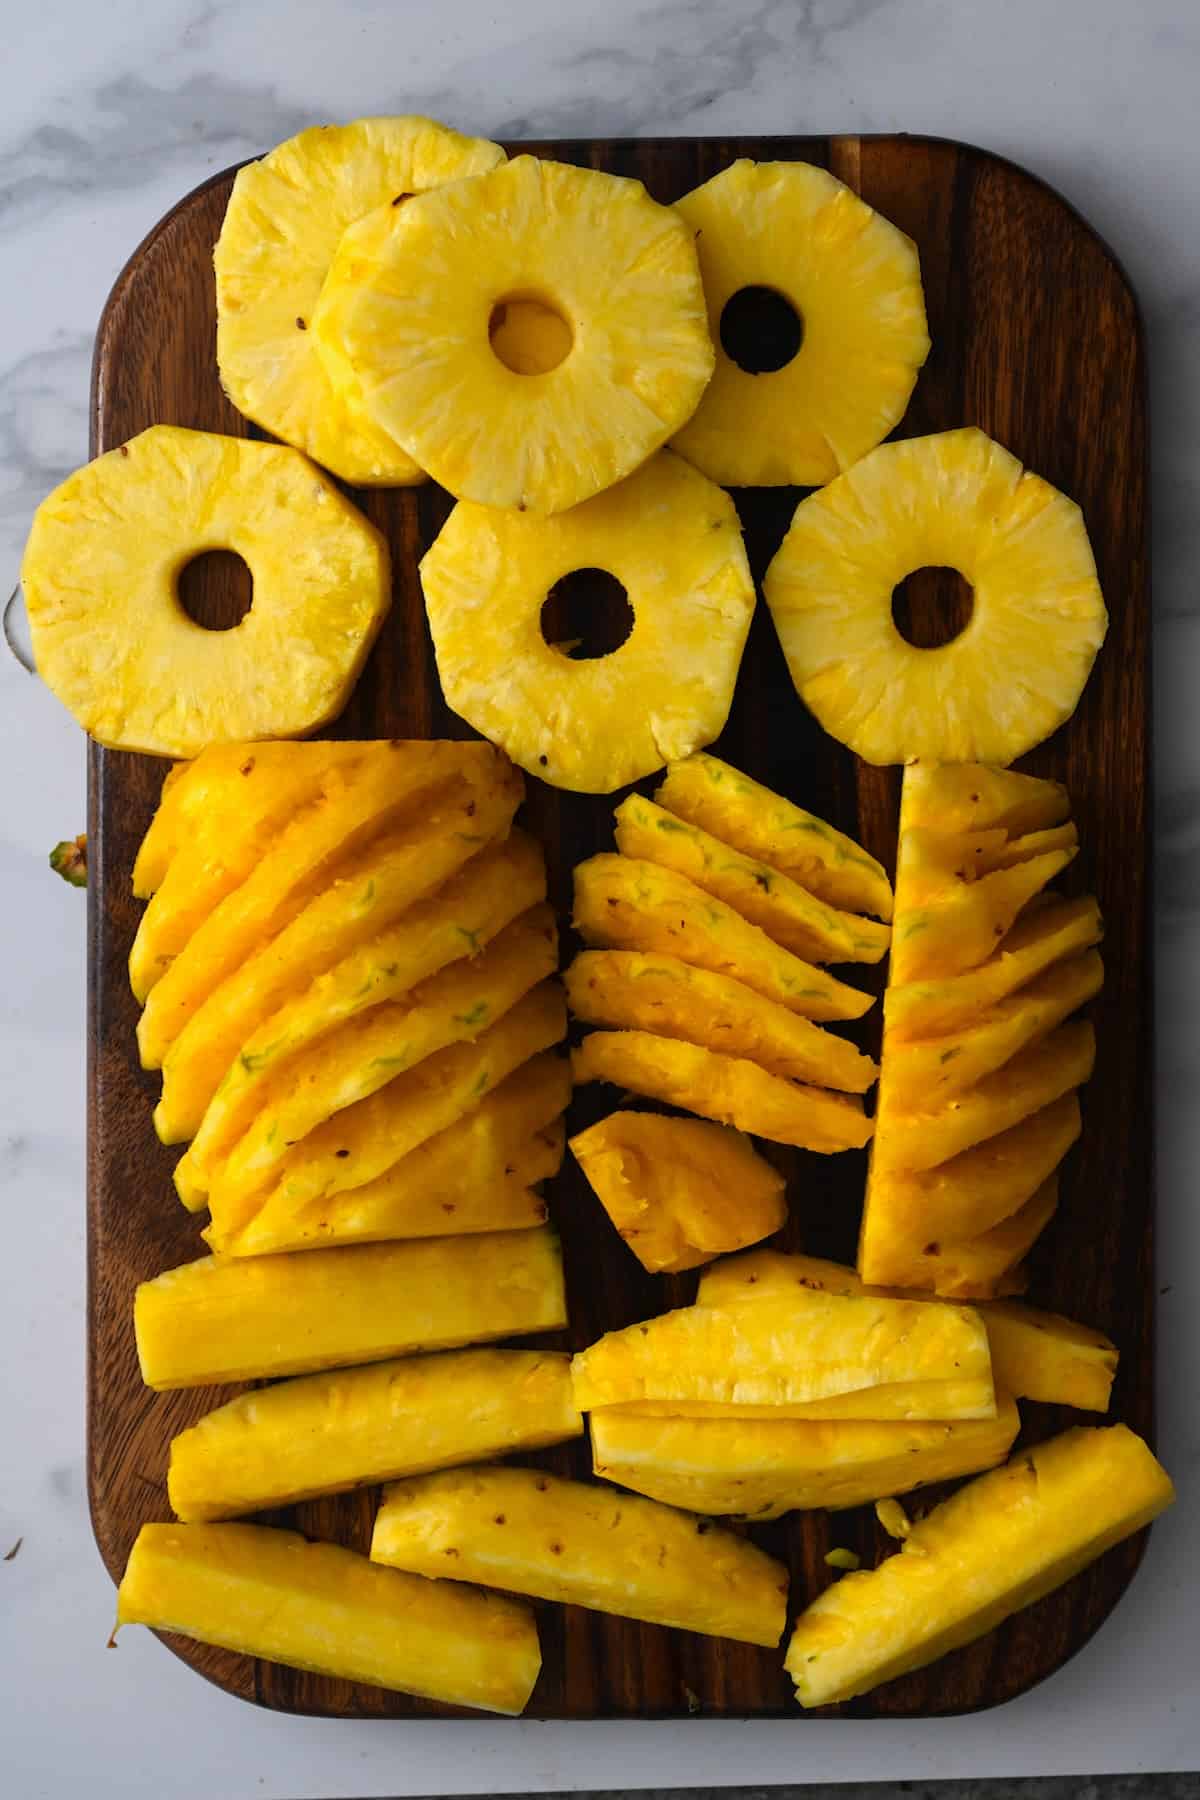 Pineapples cut into slices and rings